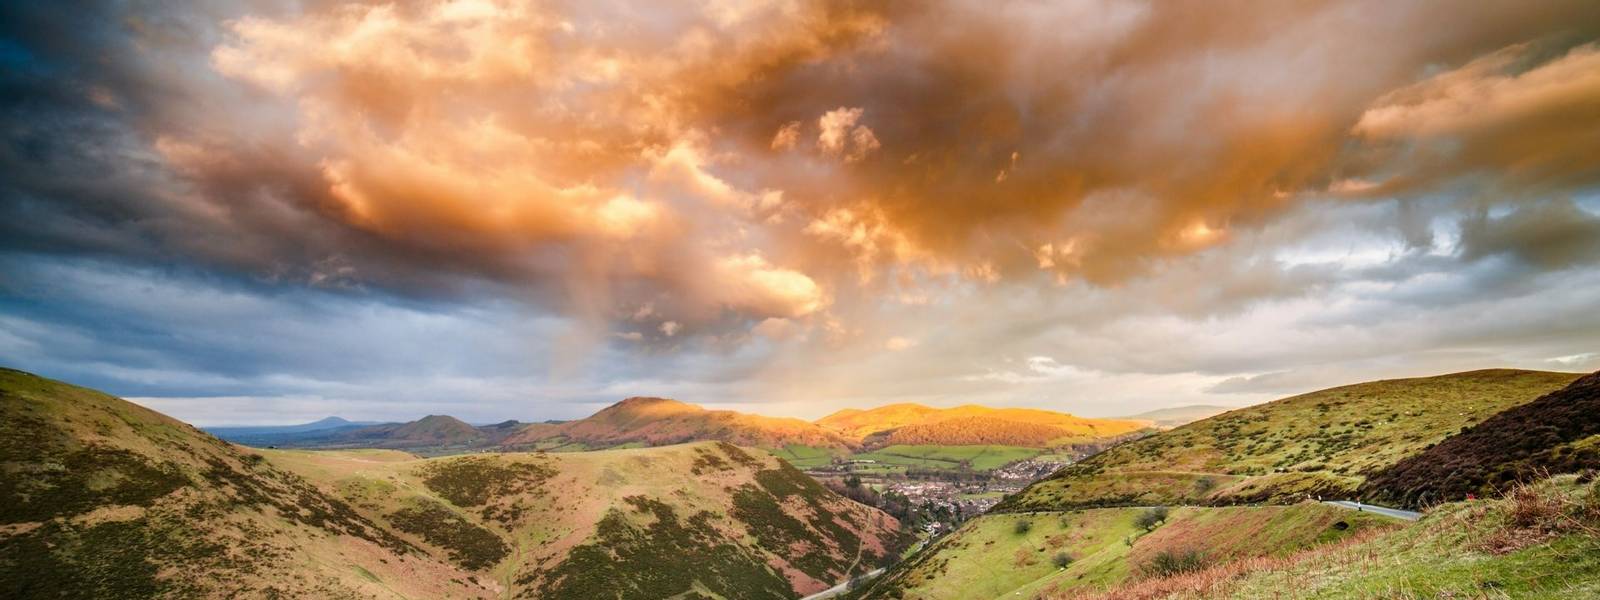 Dramatic Sunset Clouds Over Carding Mill Valley, Shropshire Hills UK